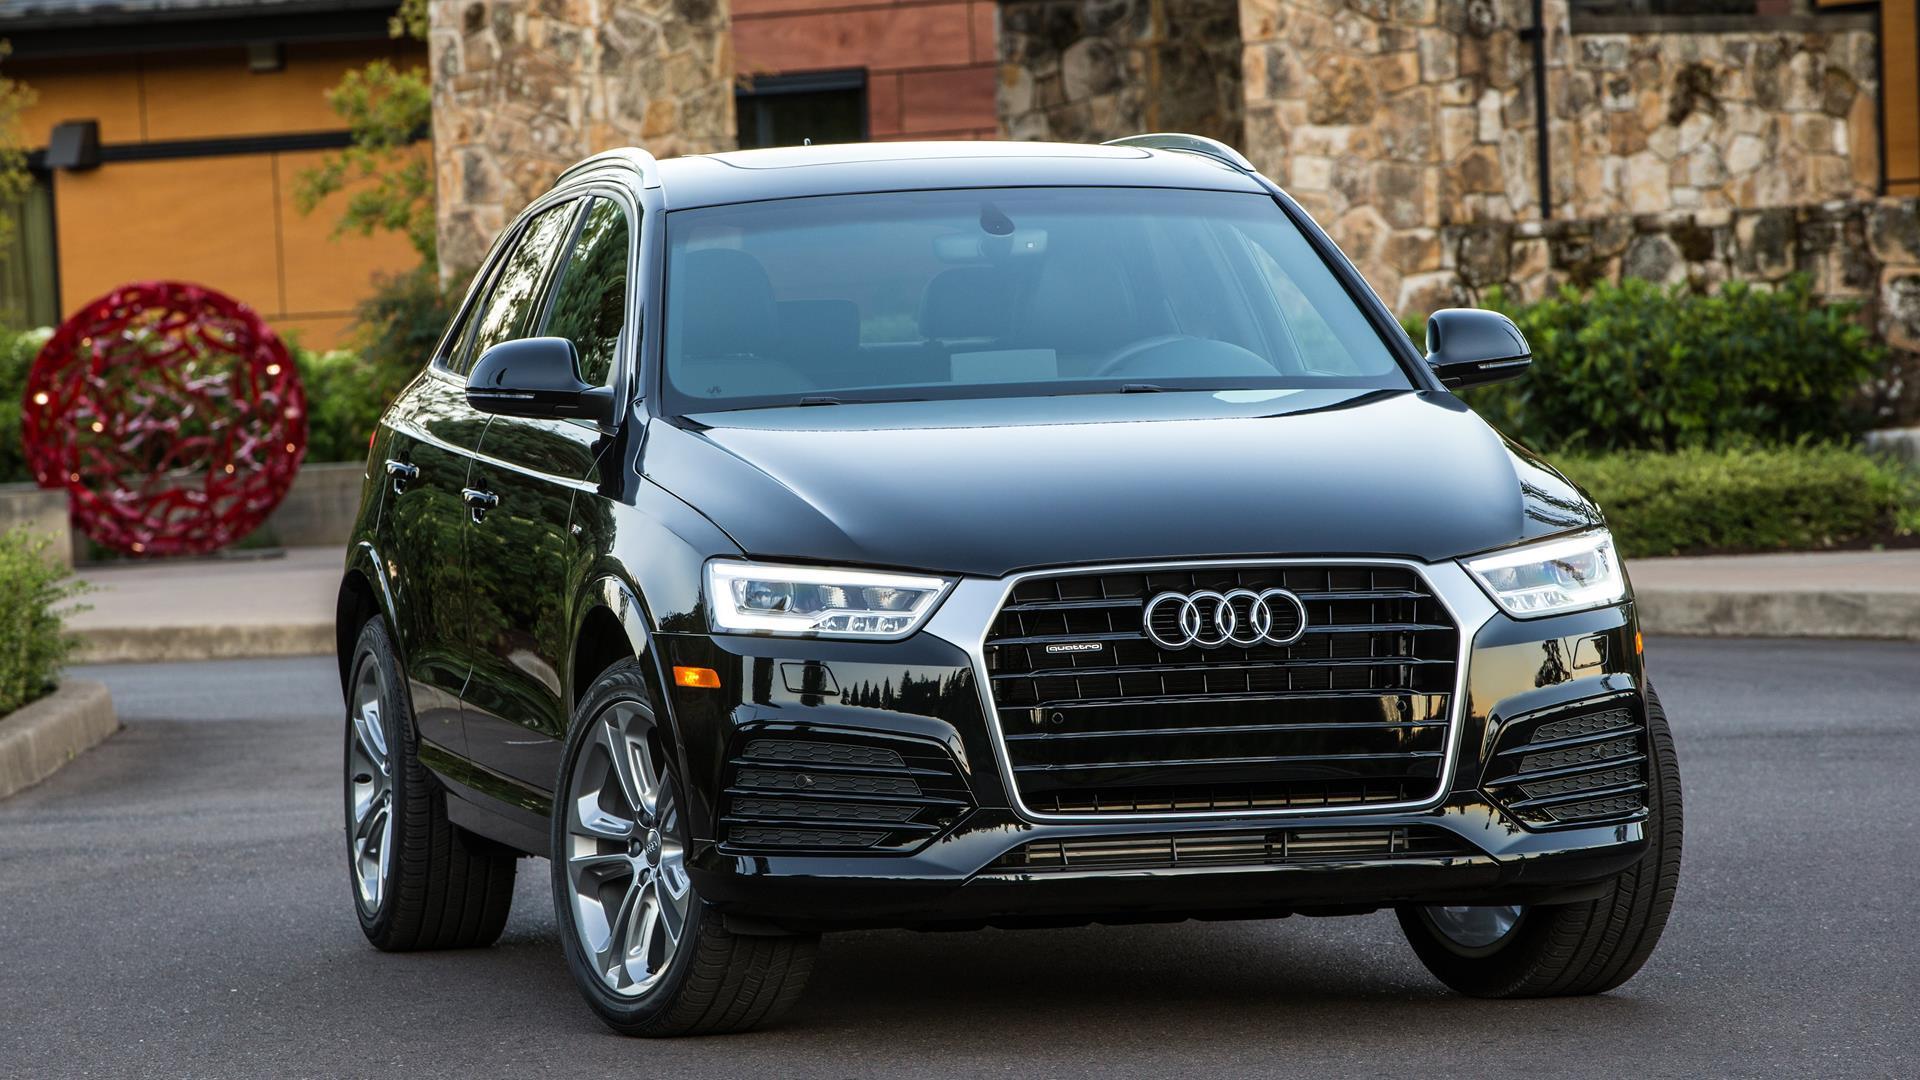 Audi Q3 News and Information